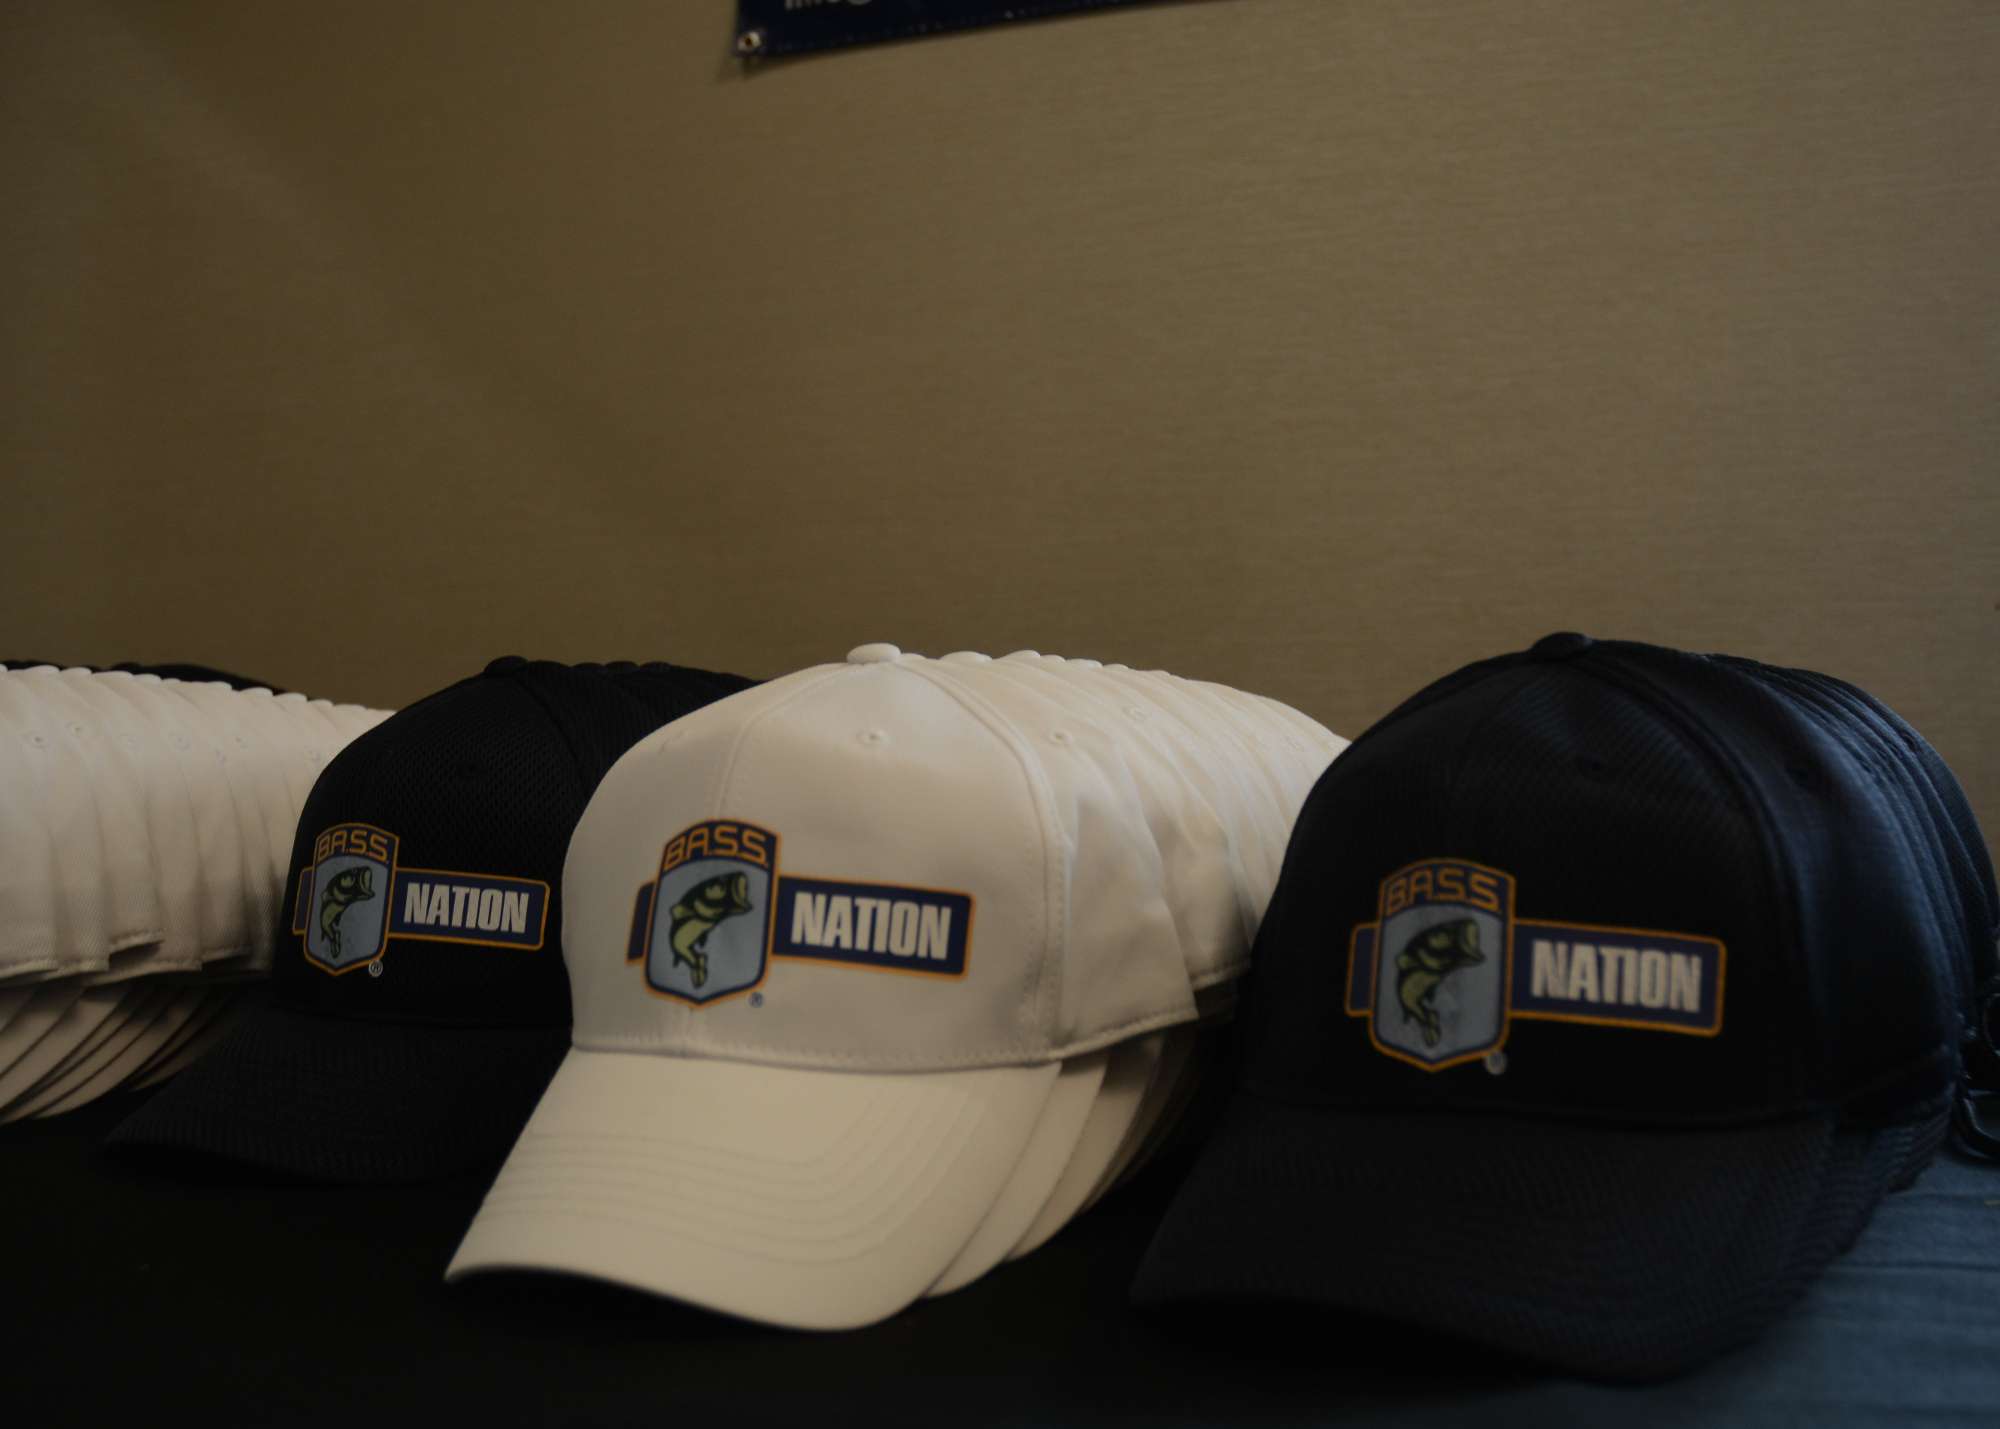 B.A.S.S. Nation hats are up for grabs, too, ...